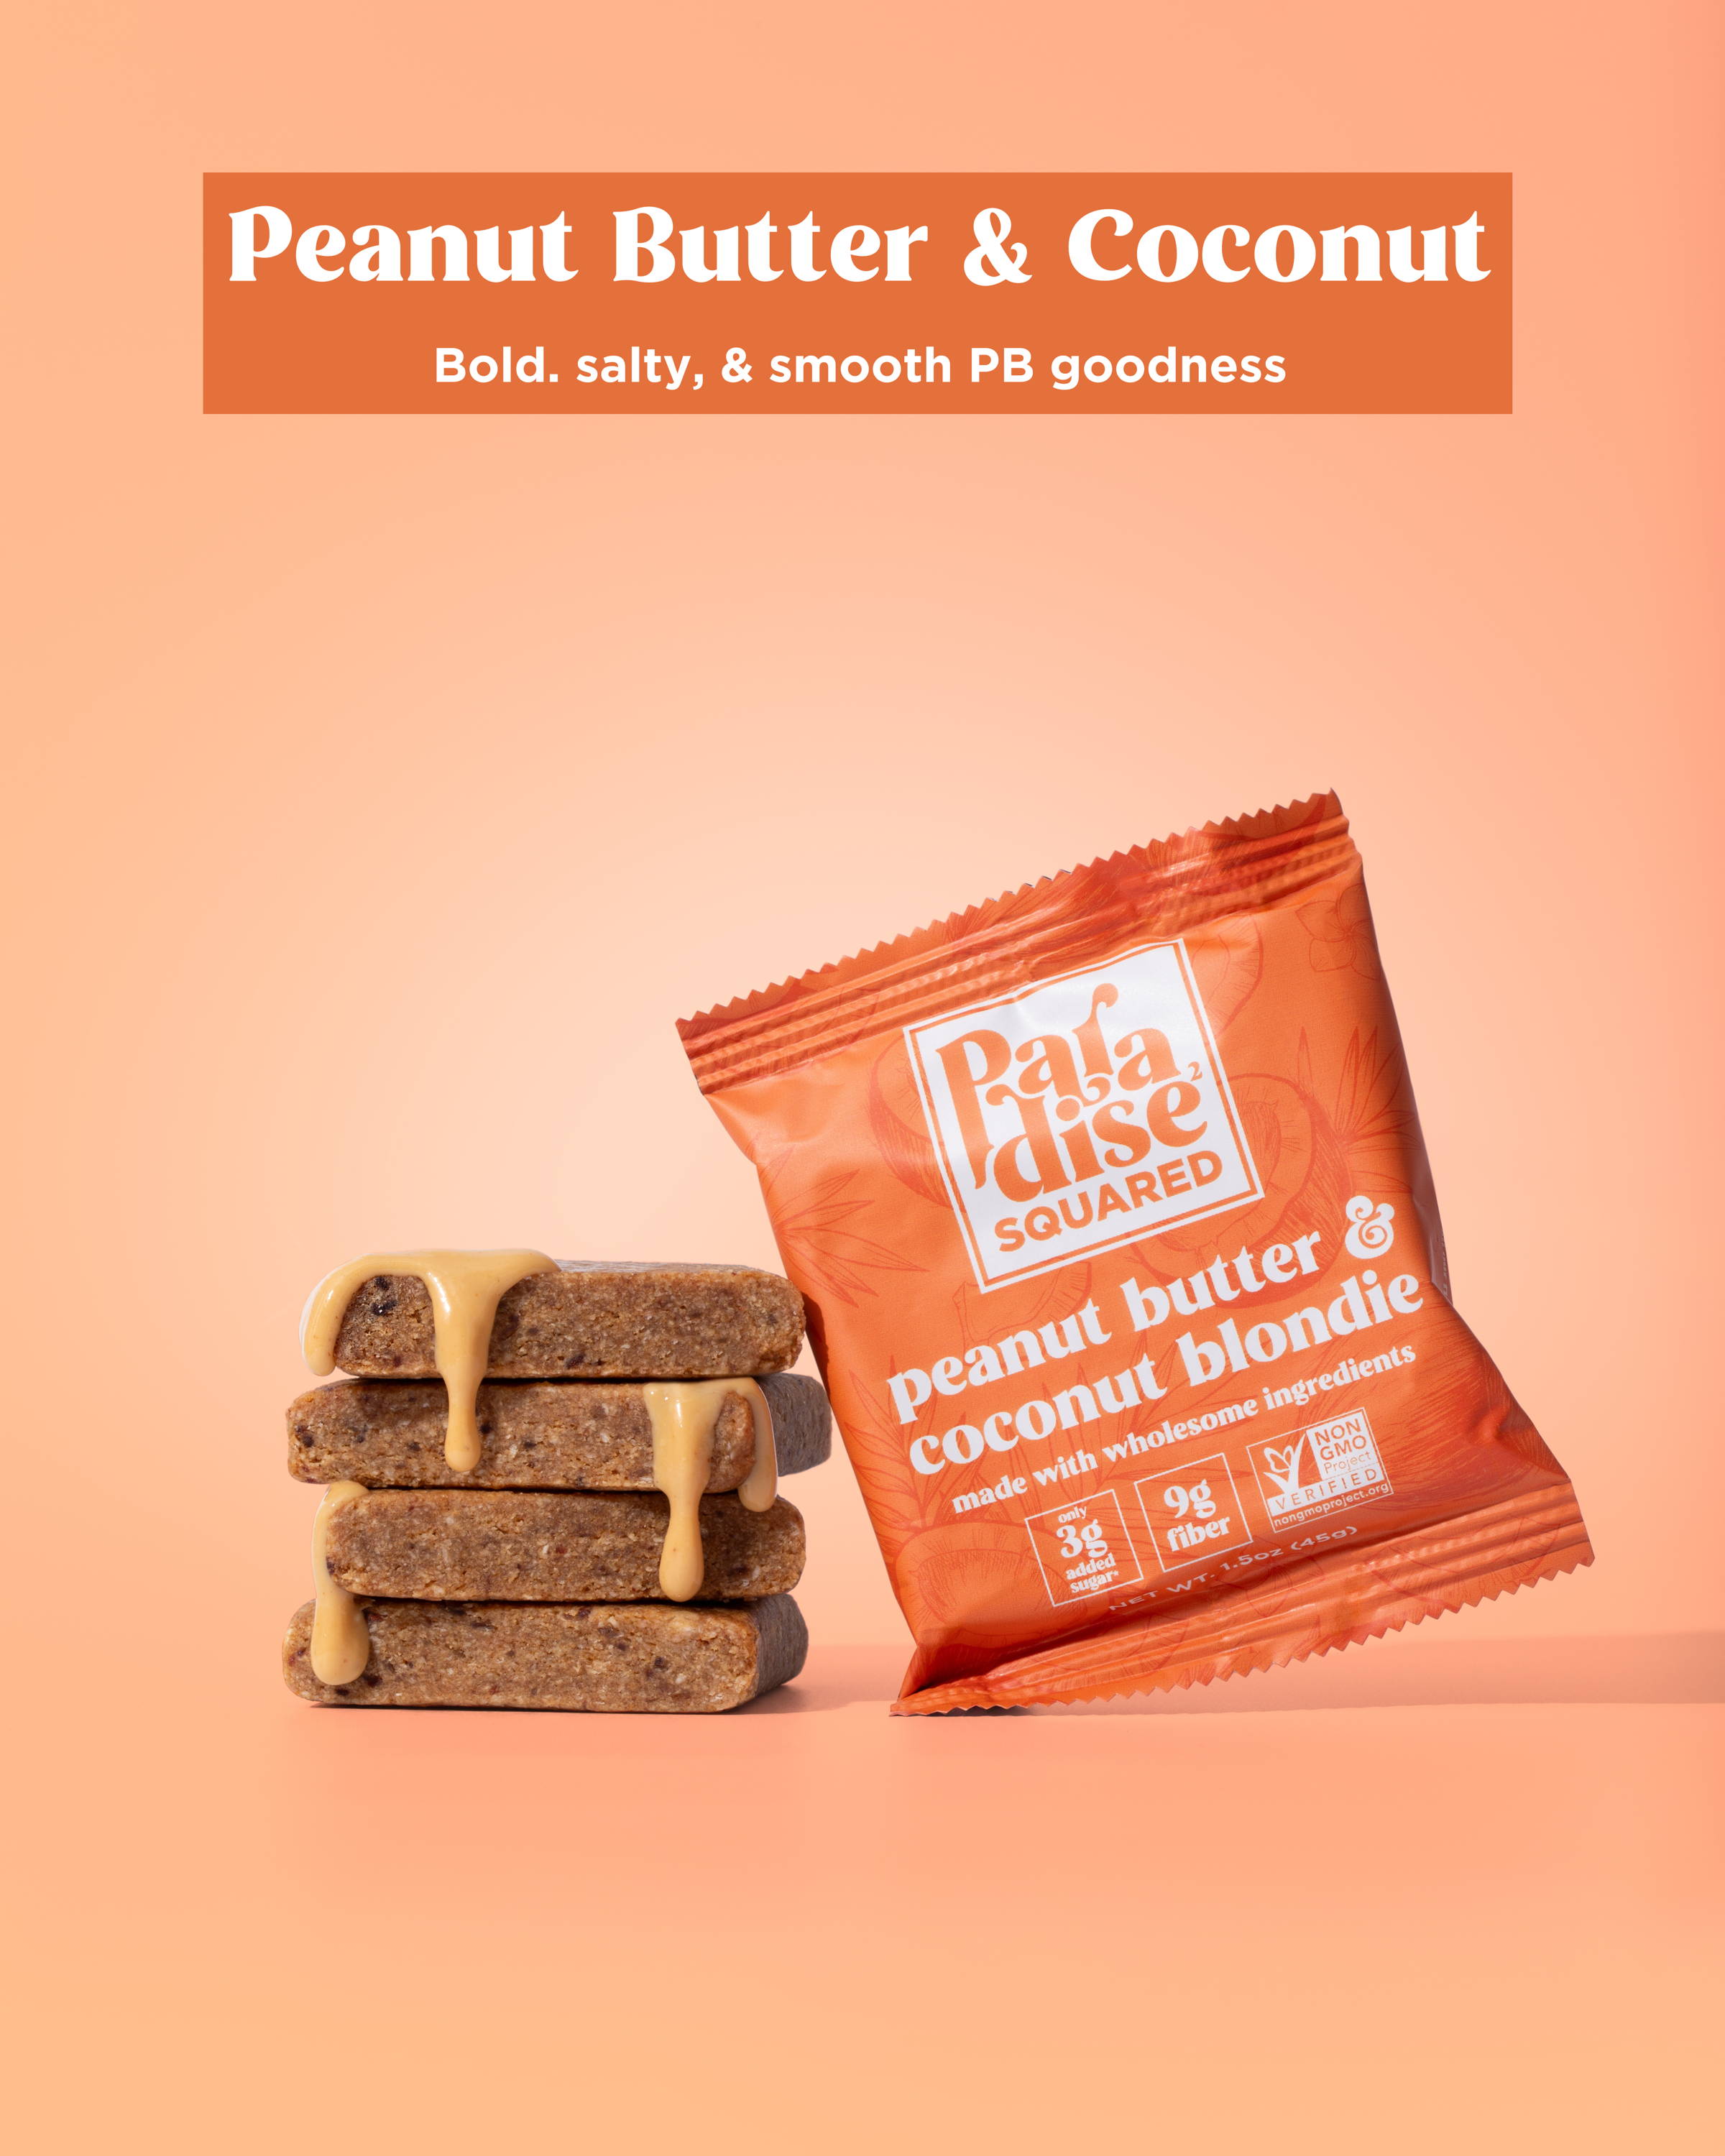 Peanut Butter & Coconut - Bold, salty, & smooth PB goodness